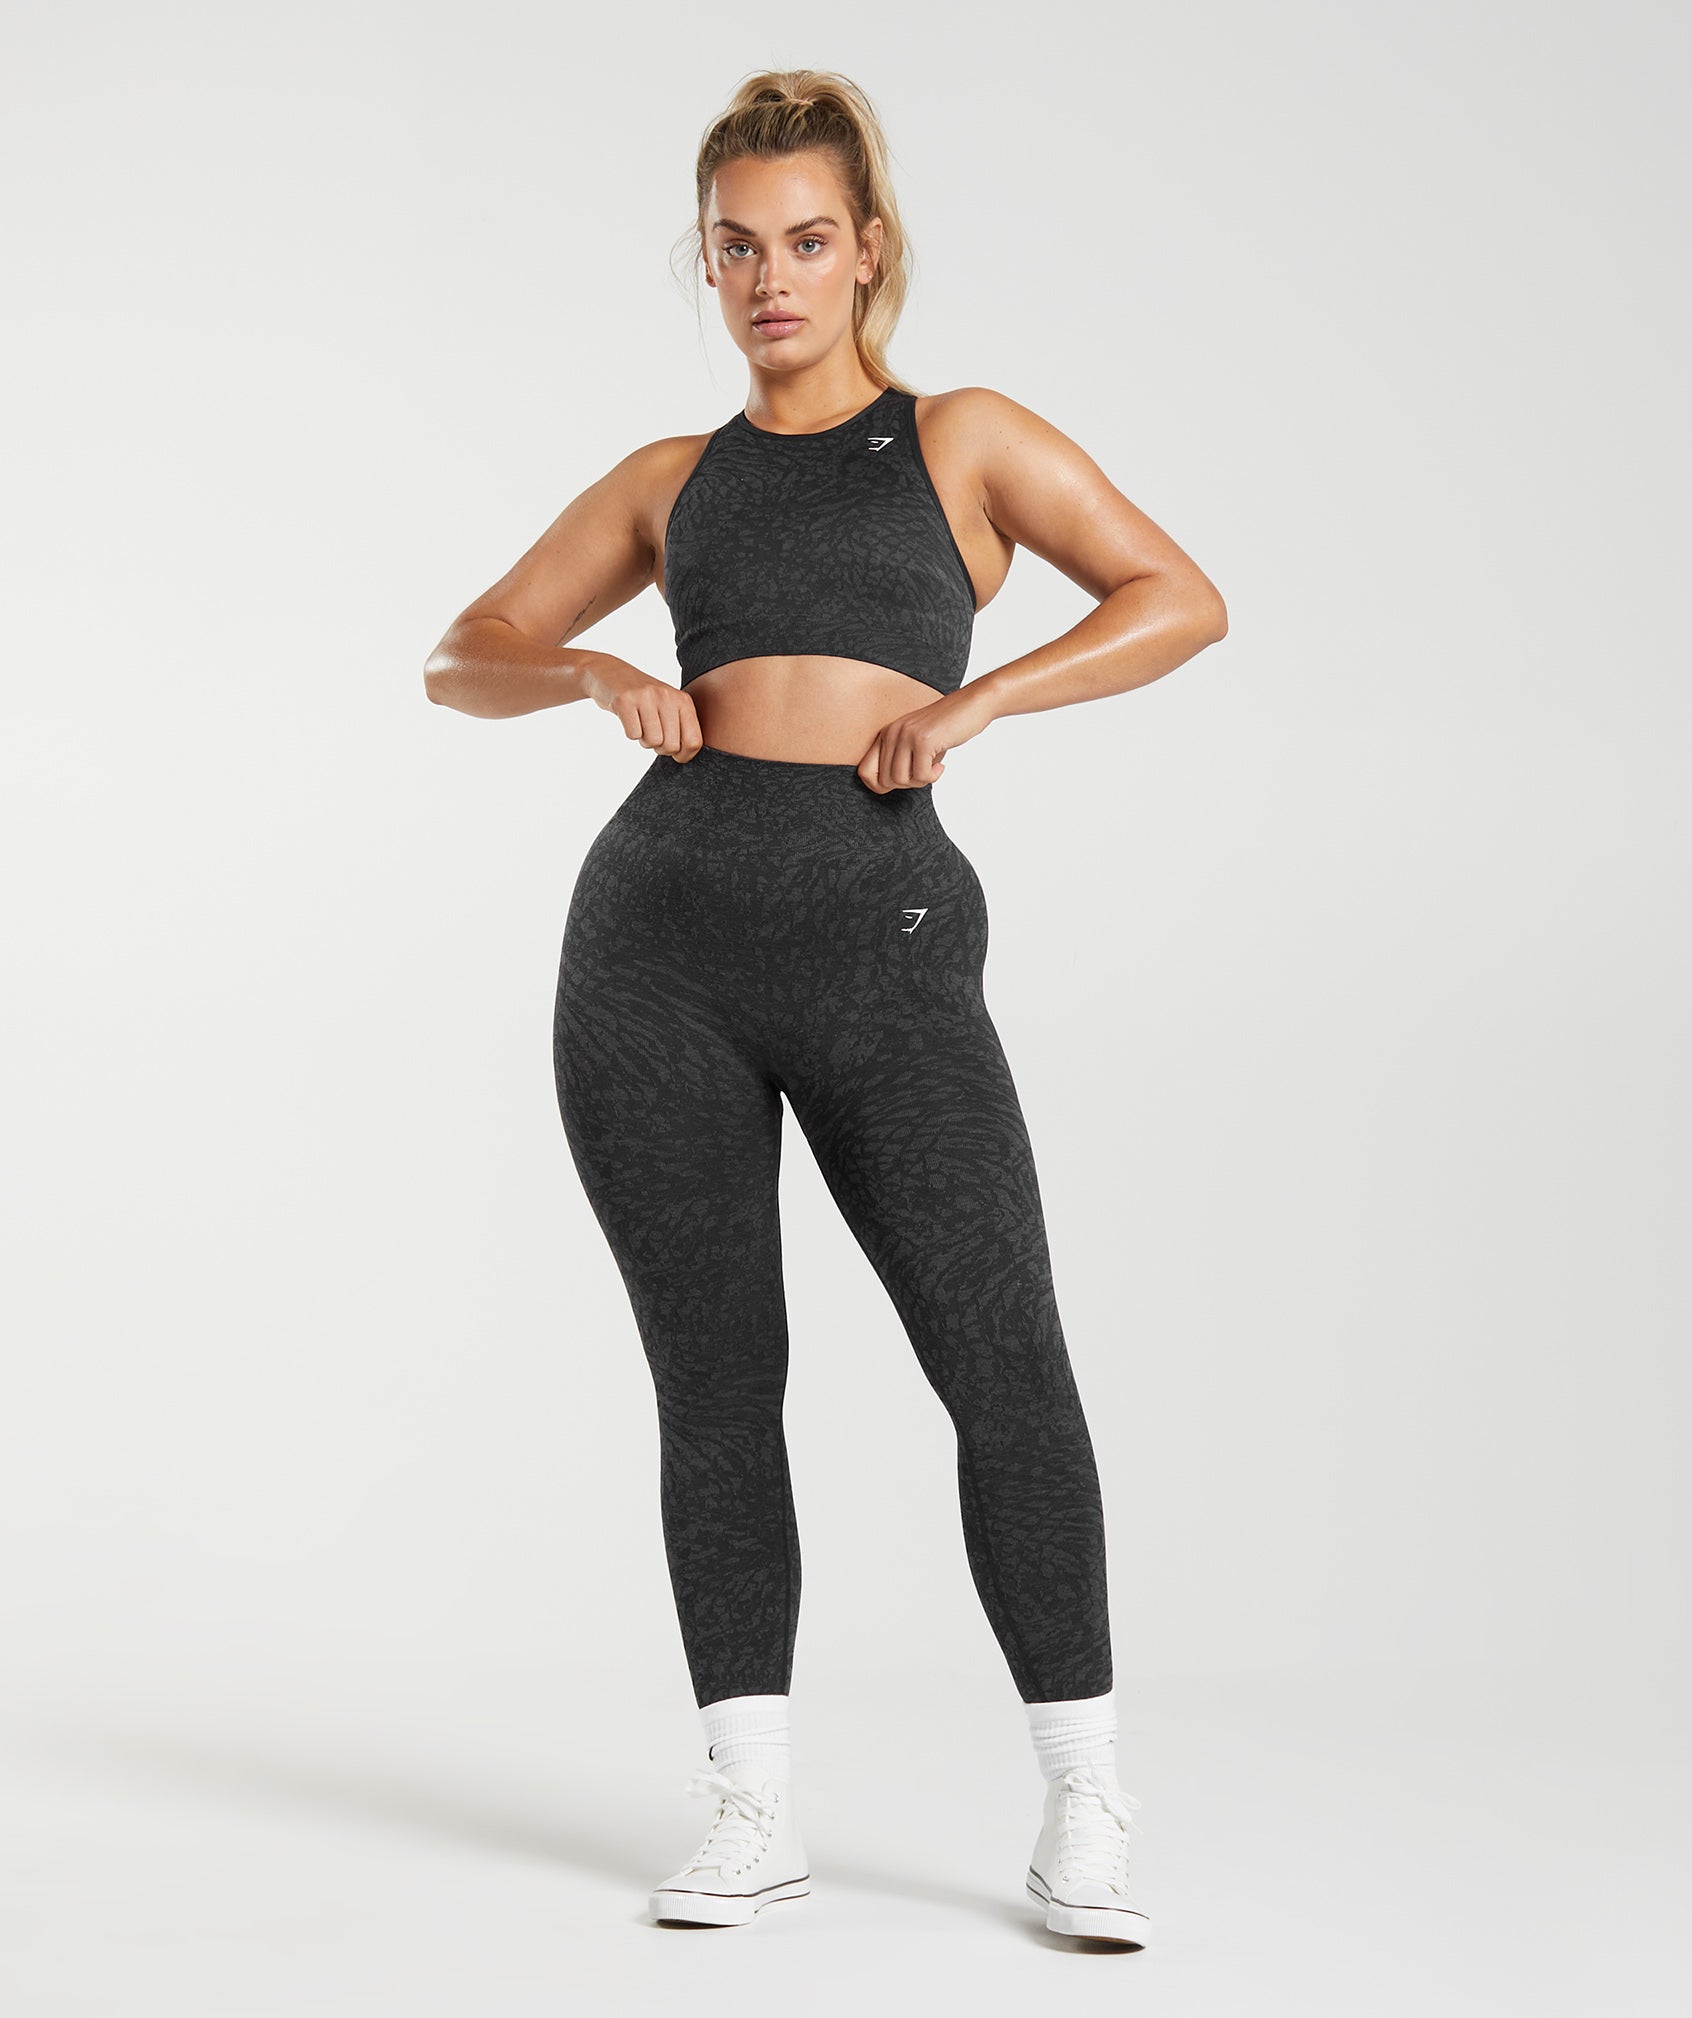 Gymshark Fit Seamless Leggings Black - $16 (54% Off Retail) - From